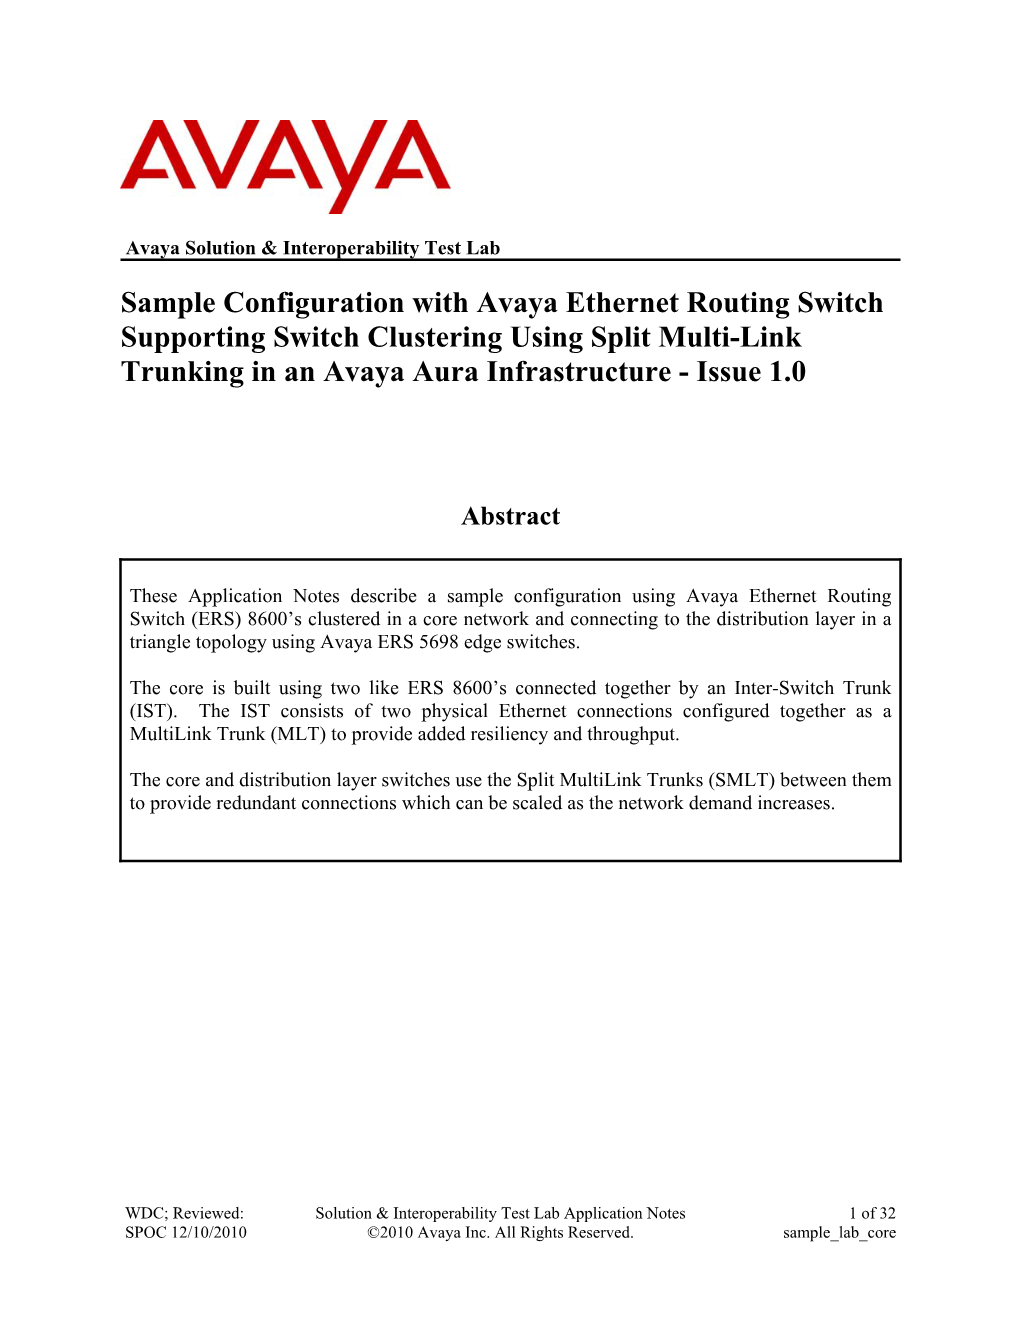 Sample Configuration with Avaya Ethernet Routing Switch Supporting Switch Clustering Using Split Multi-Link Trunking in an Avaya Aura Infrastructure - Issue 1.0